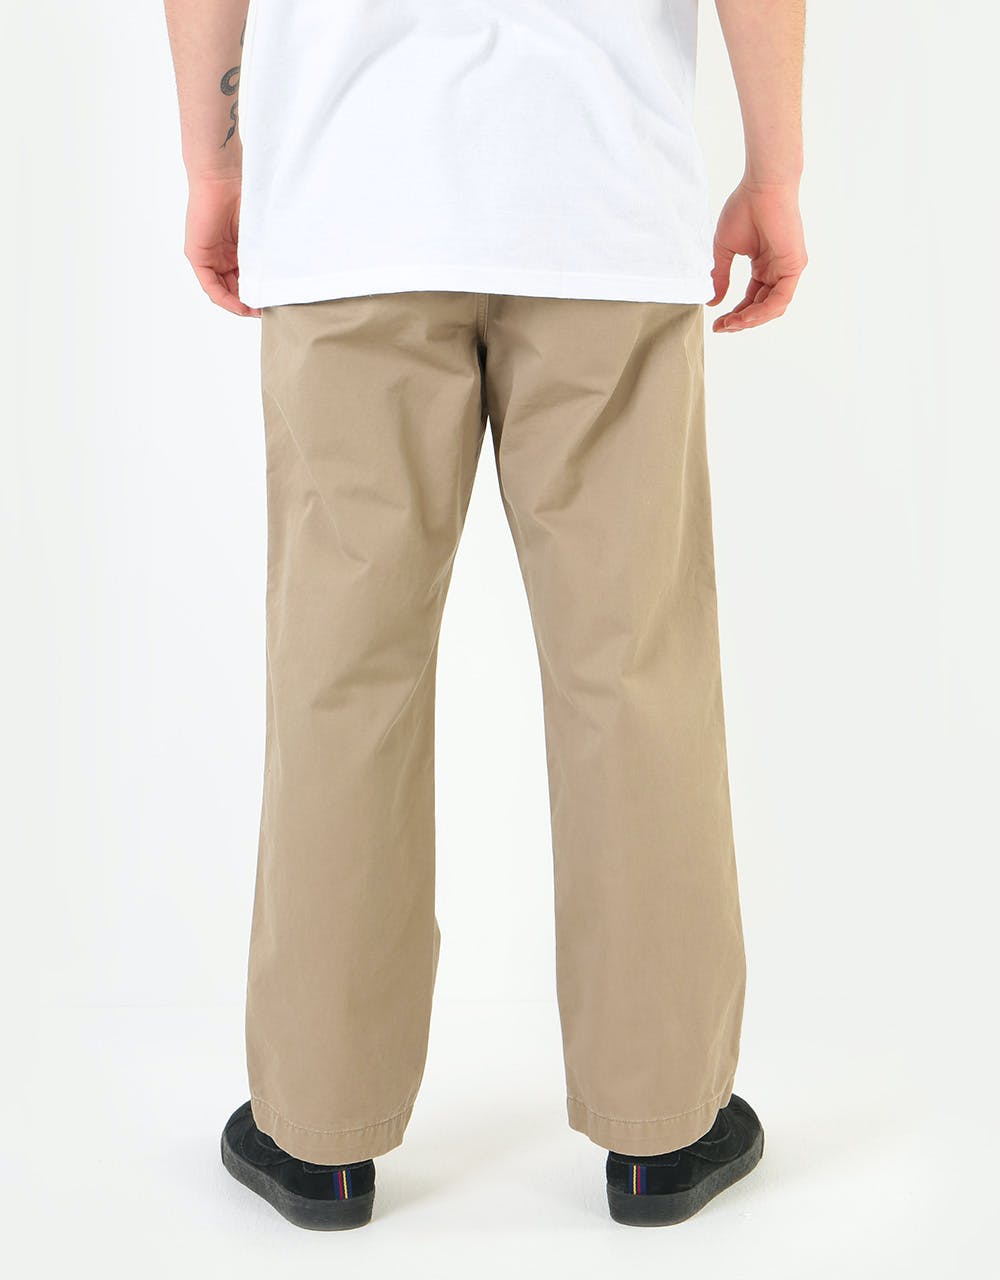 Carhartt WIP Dallas Pant - Leather (Stone Washed)